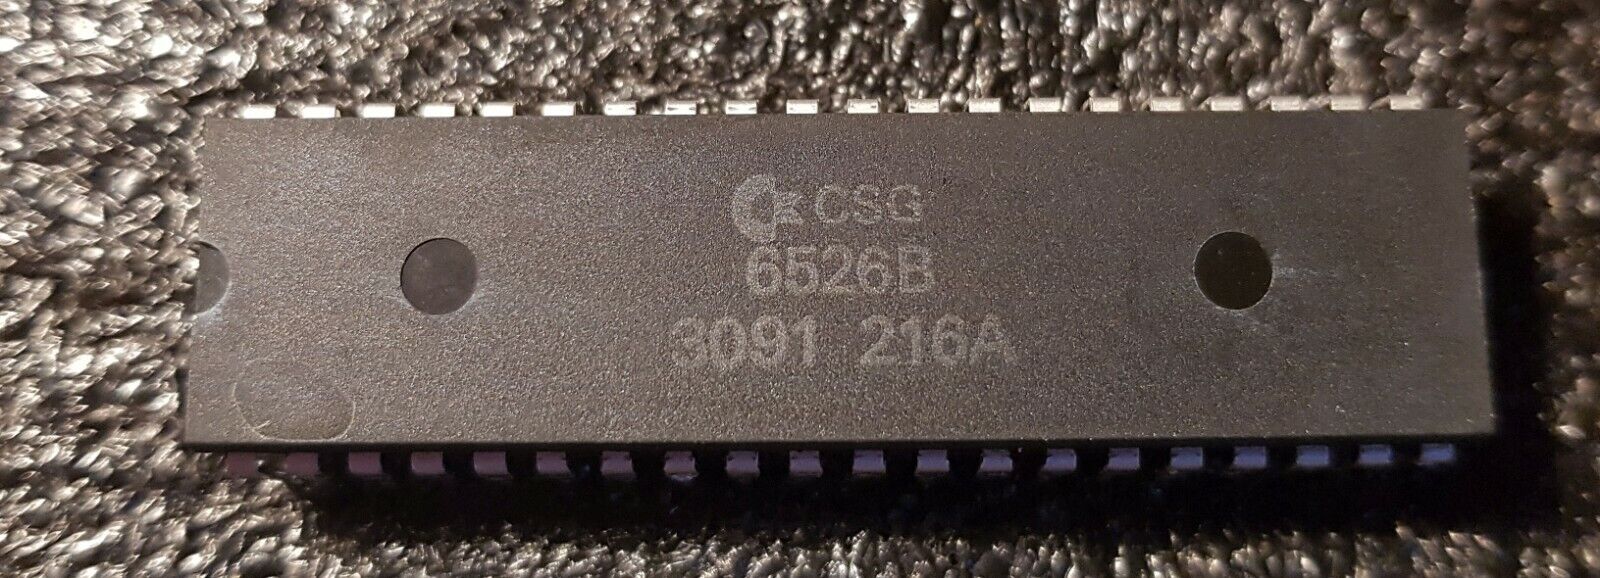 CSG 6526B CIA, Chip for Commodore 64/128/1570/1571, Genuine part working.